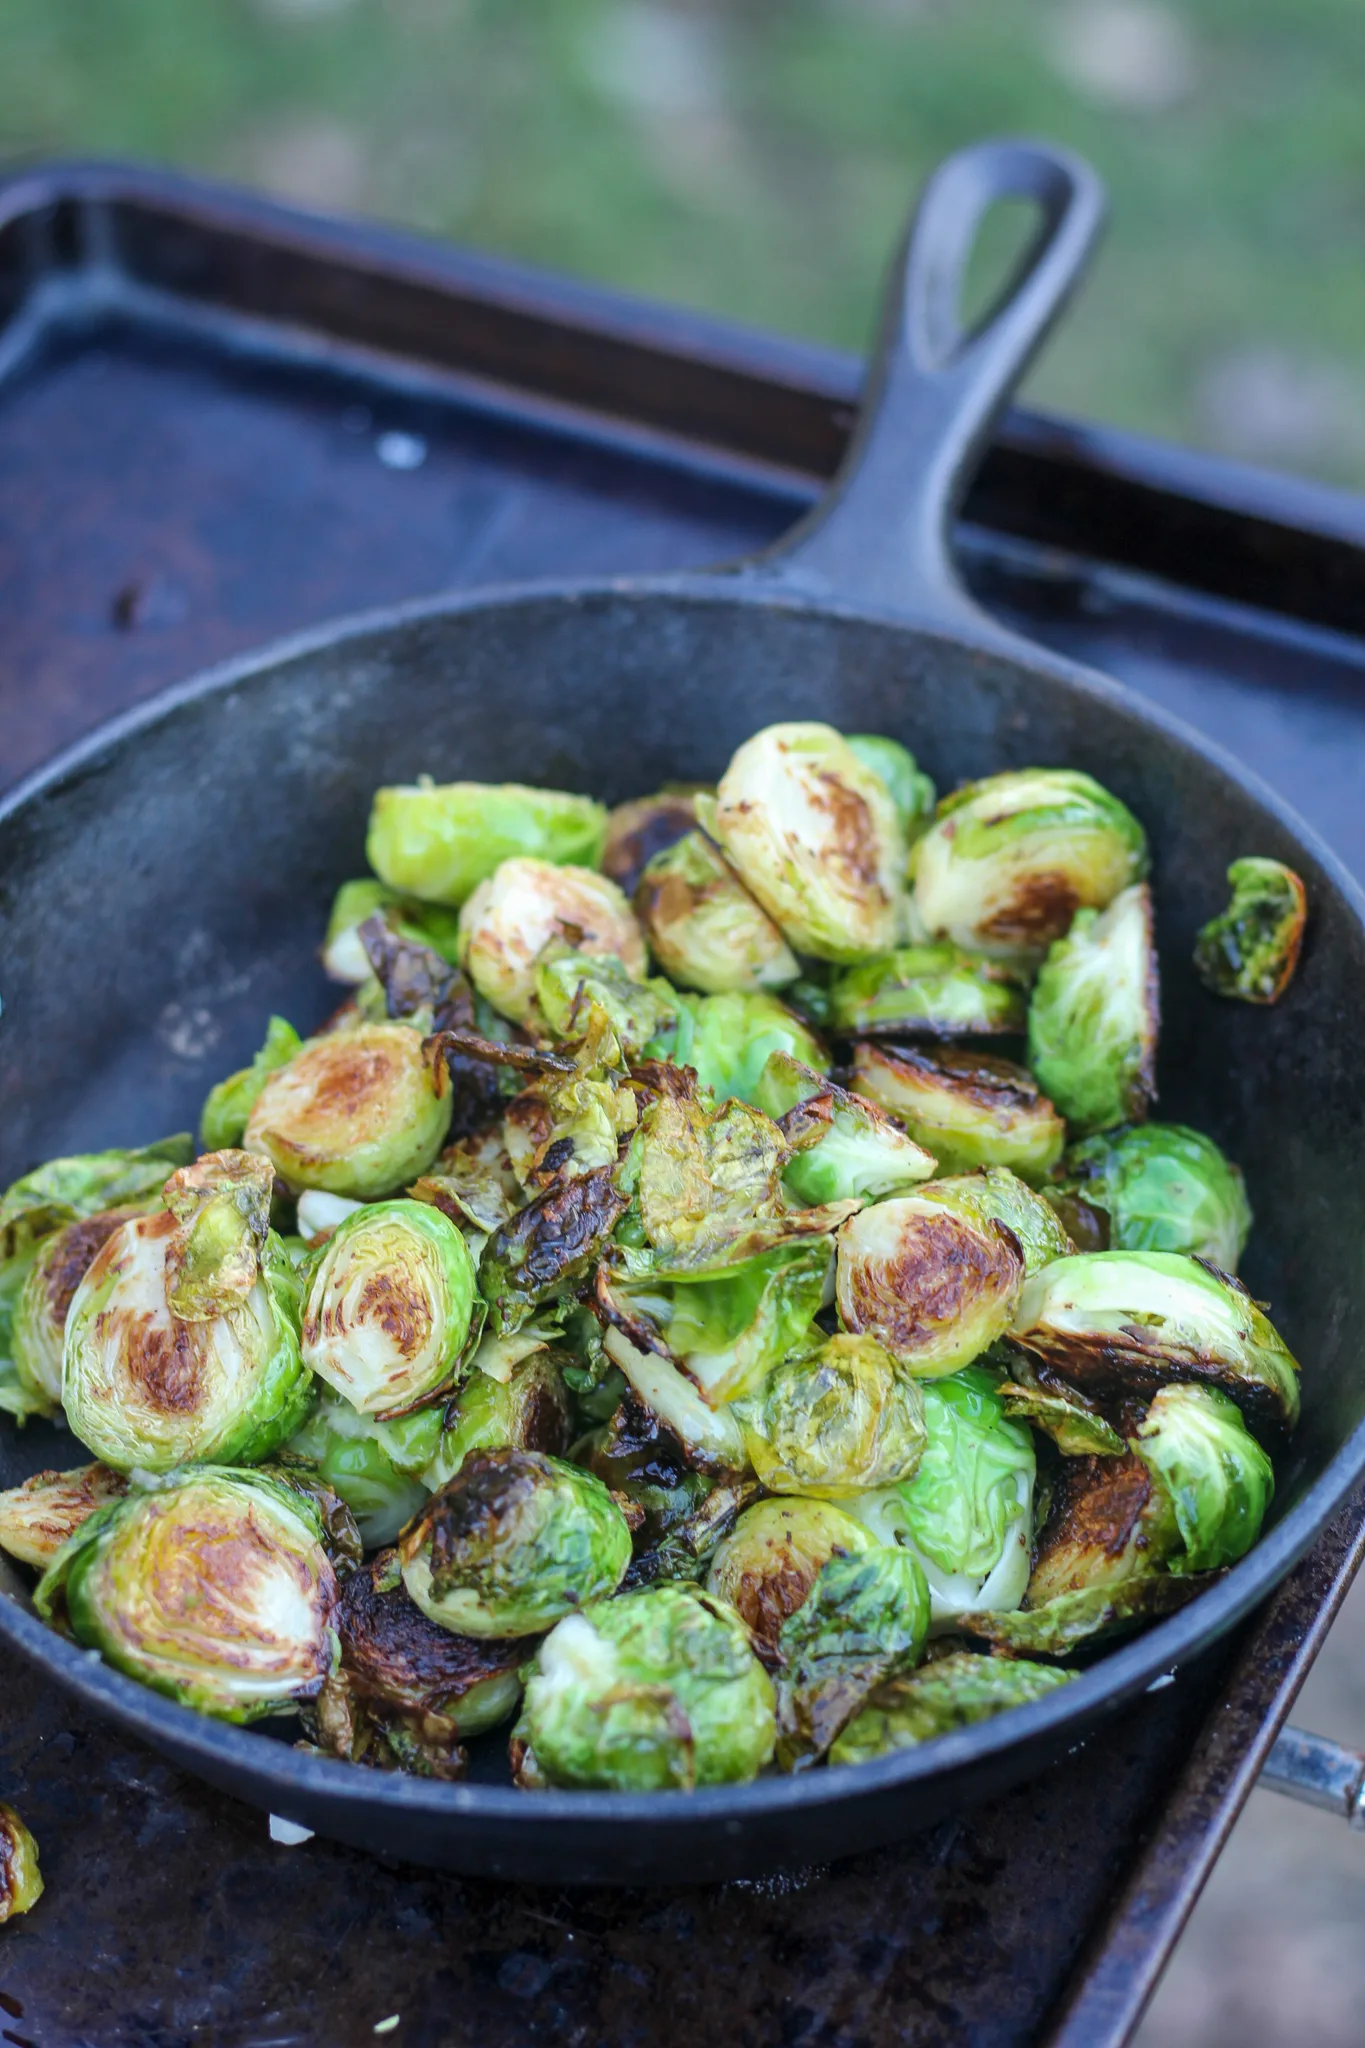 Blackstone Grilled Brussel Sprouts